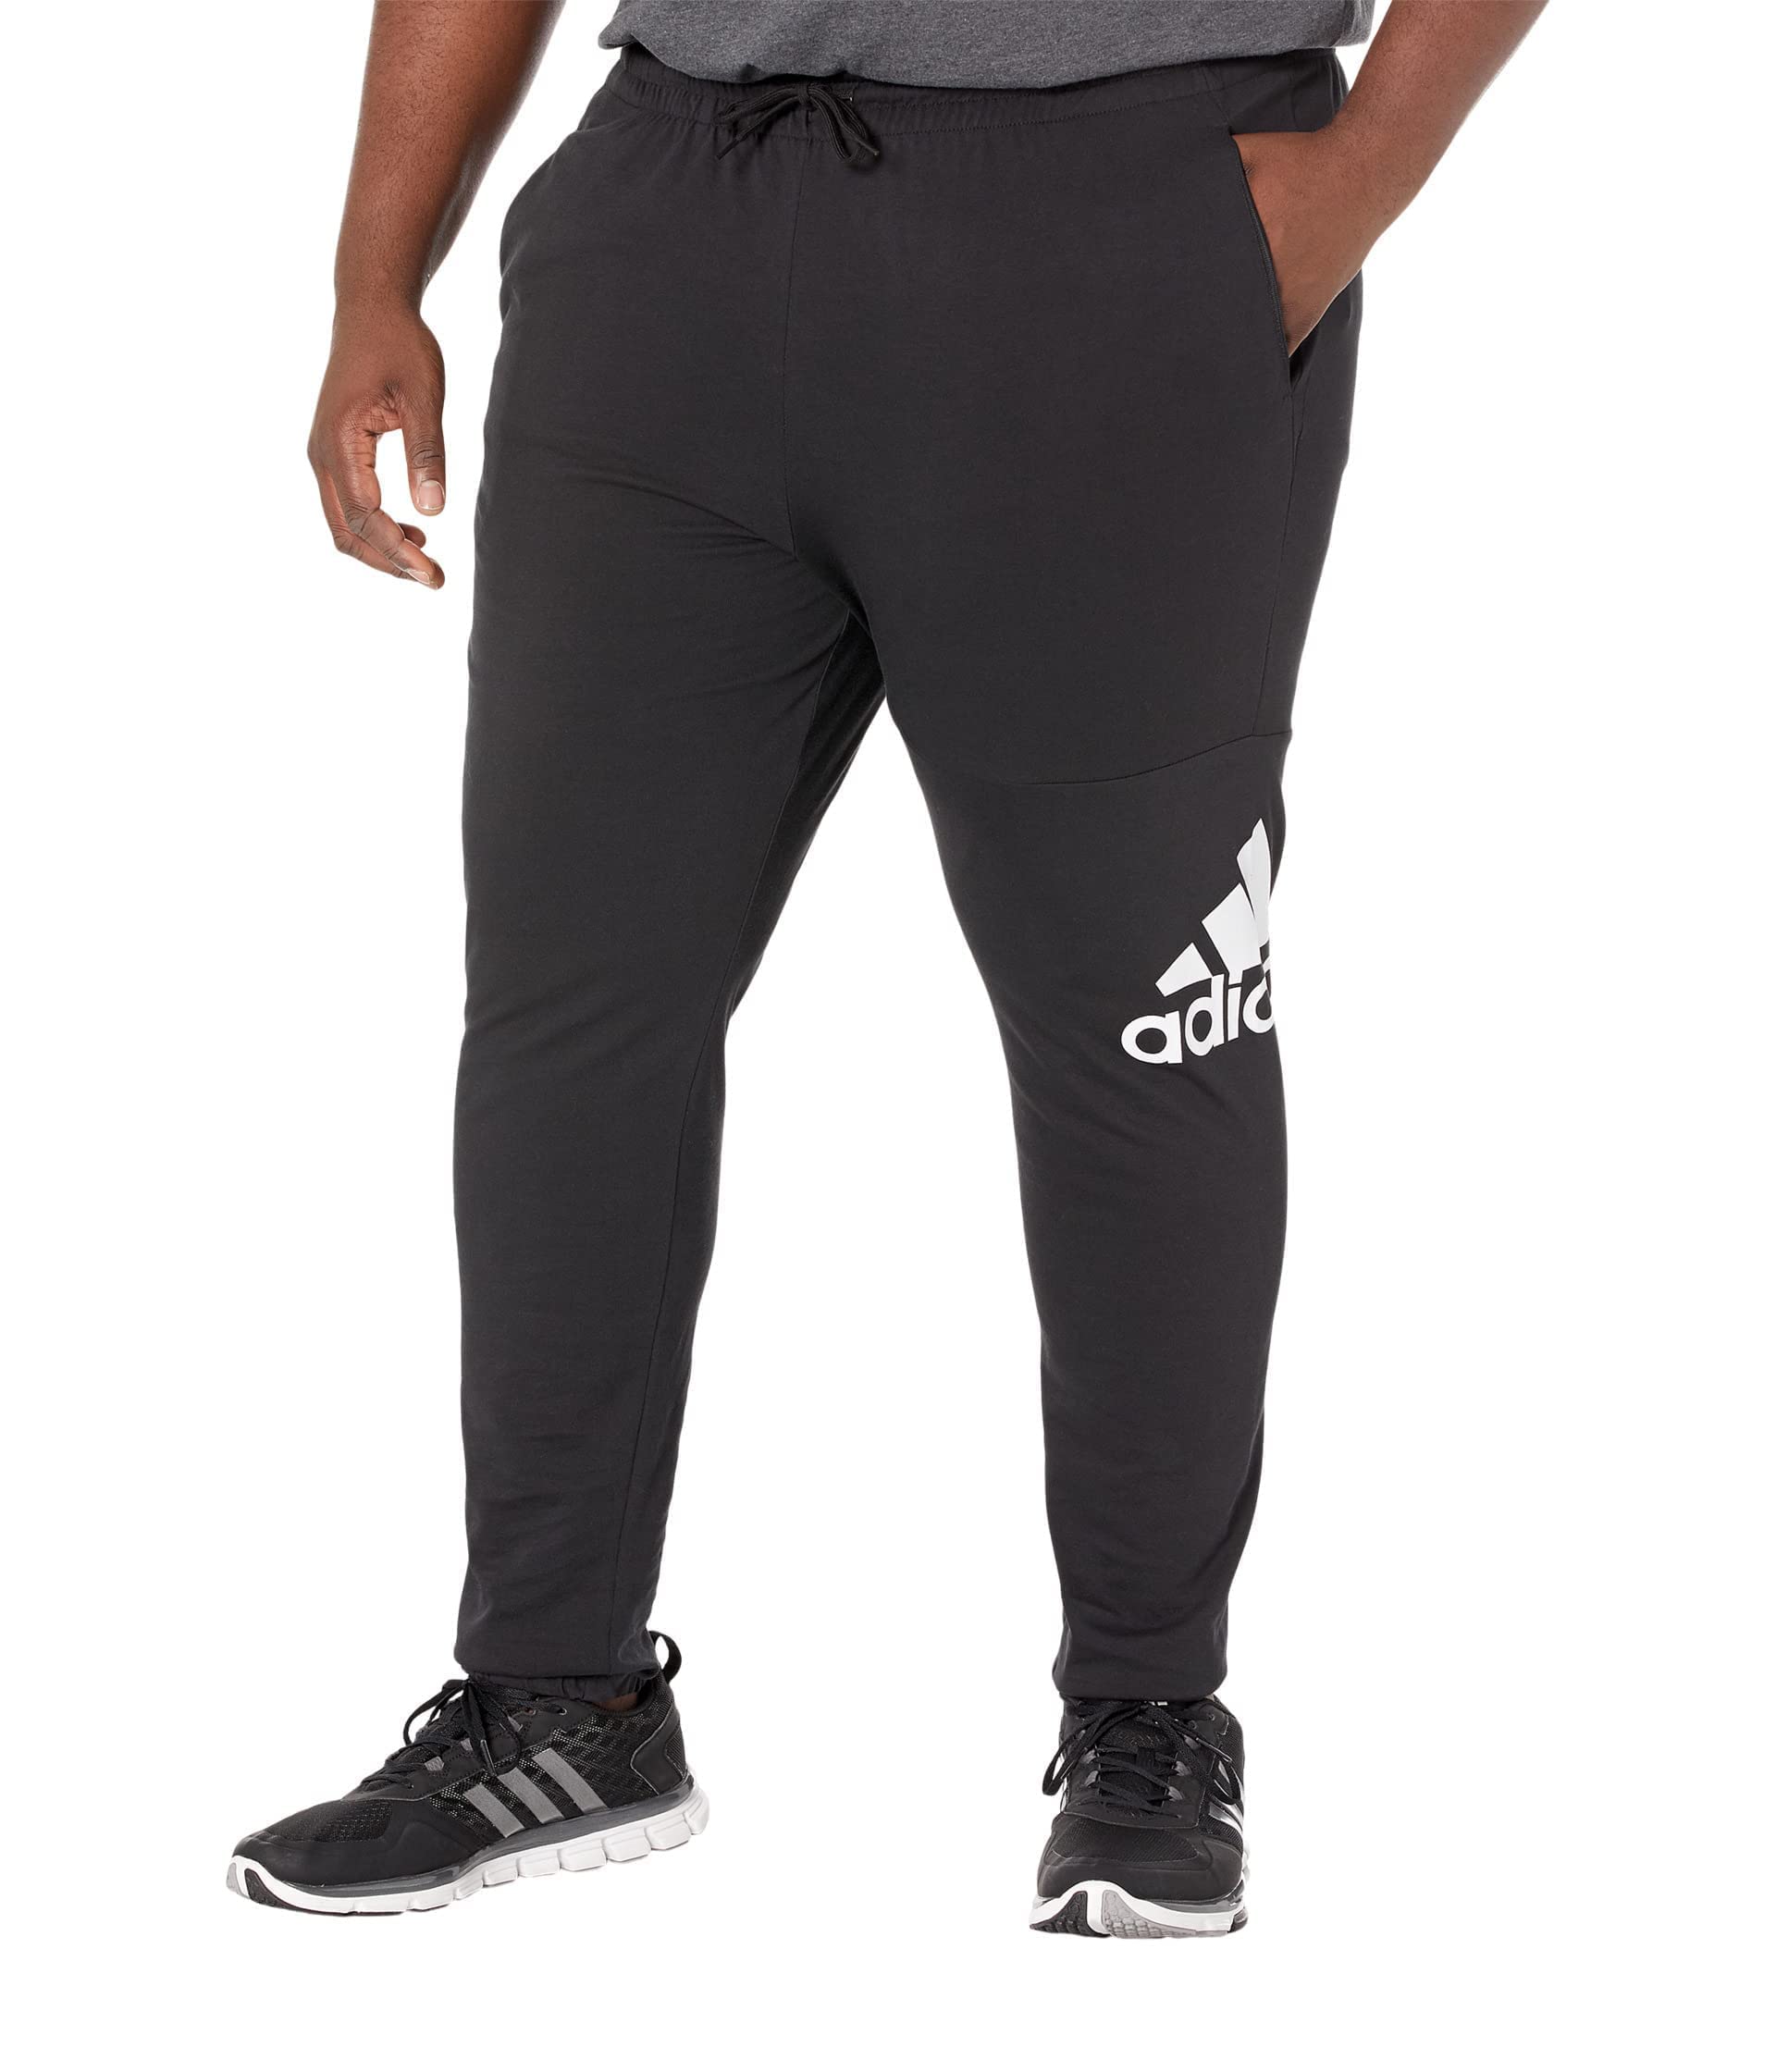 adidas Men's Essentials Single Jersey Tapered Badge of Sport Pants, Black, Large